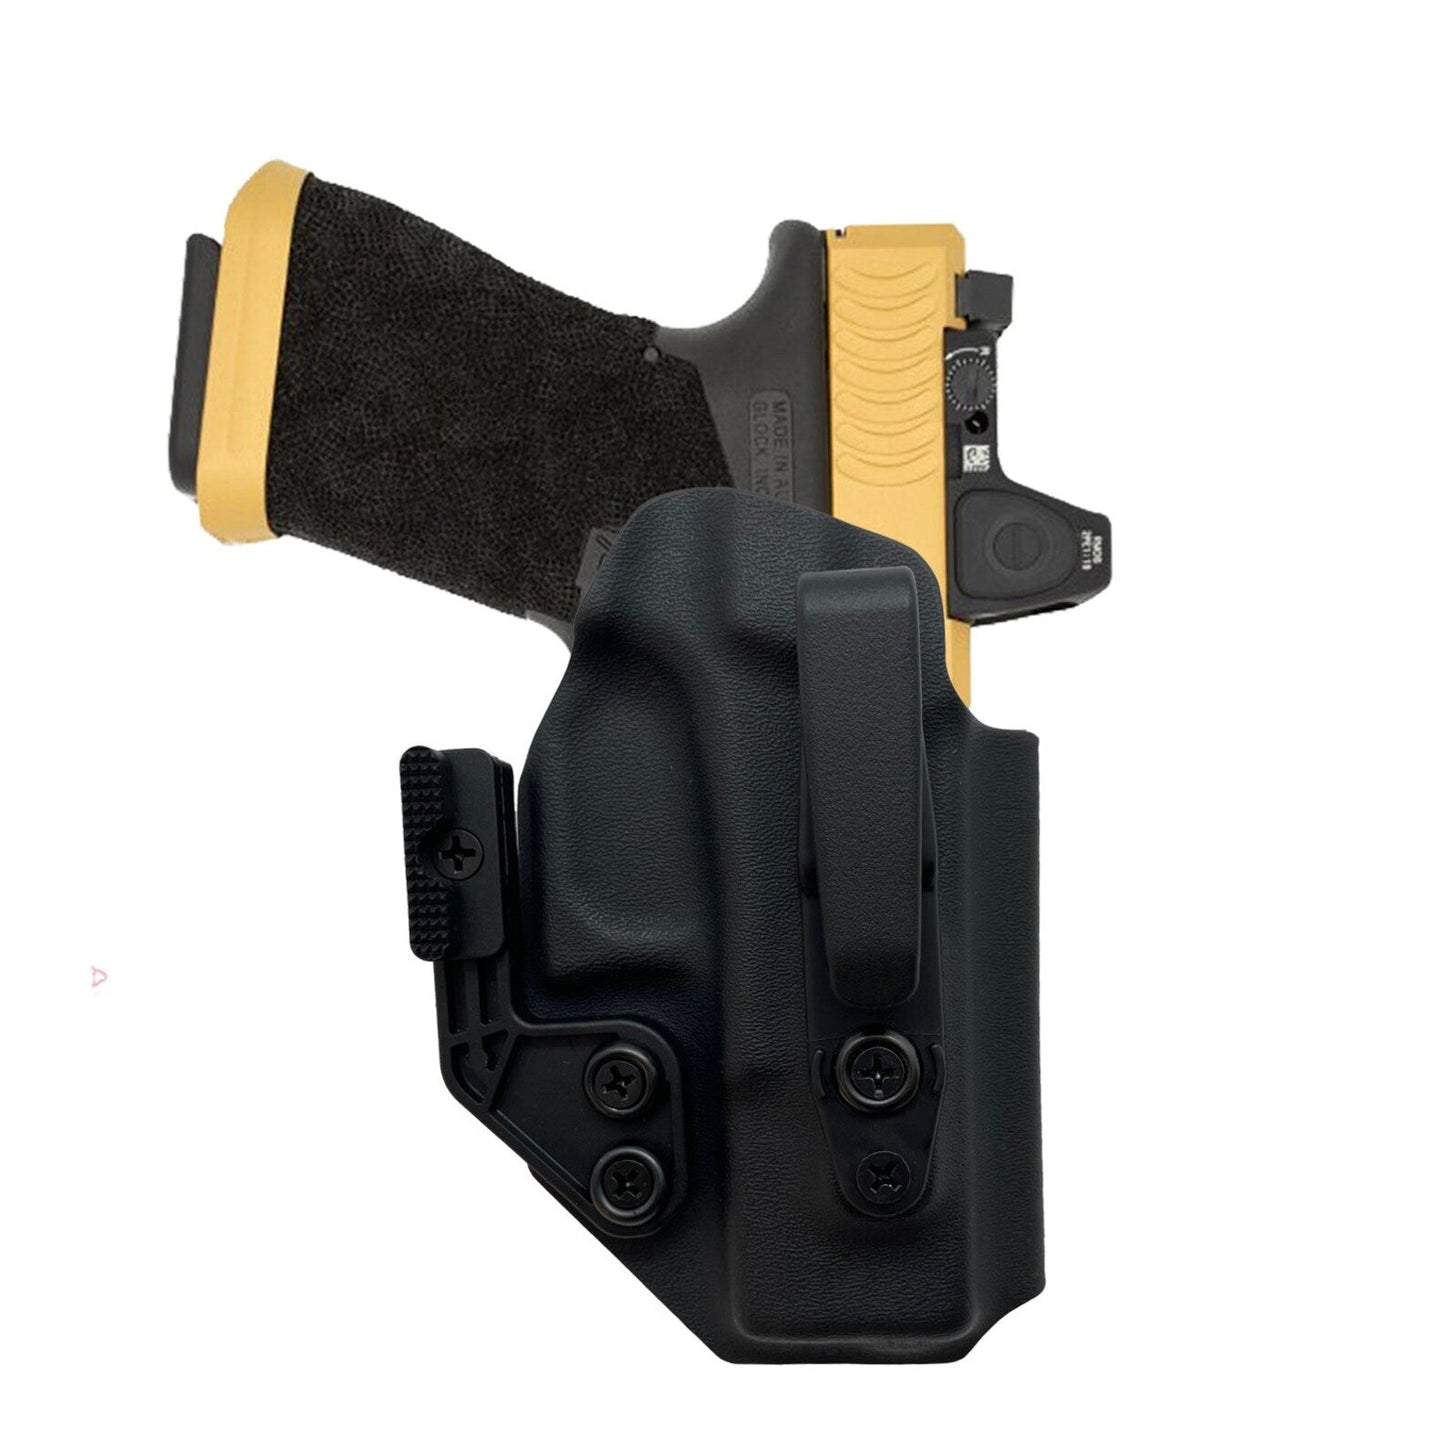 XDS 3.3" 9/45 (Micro Tuckable Holster) IWB (Inside The Waistband Holster)